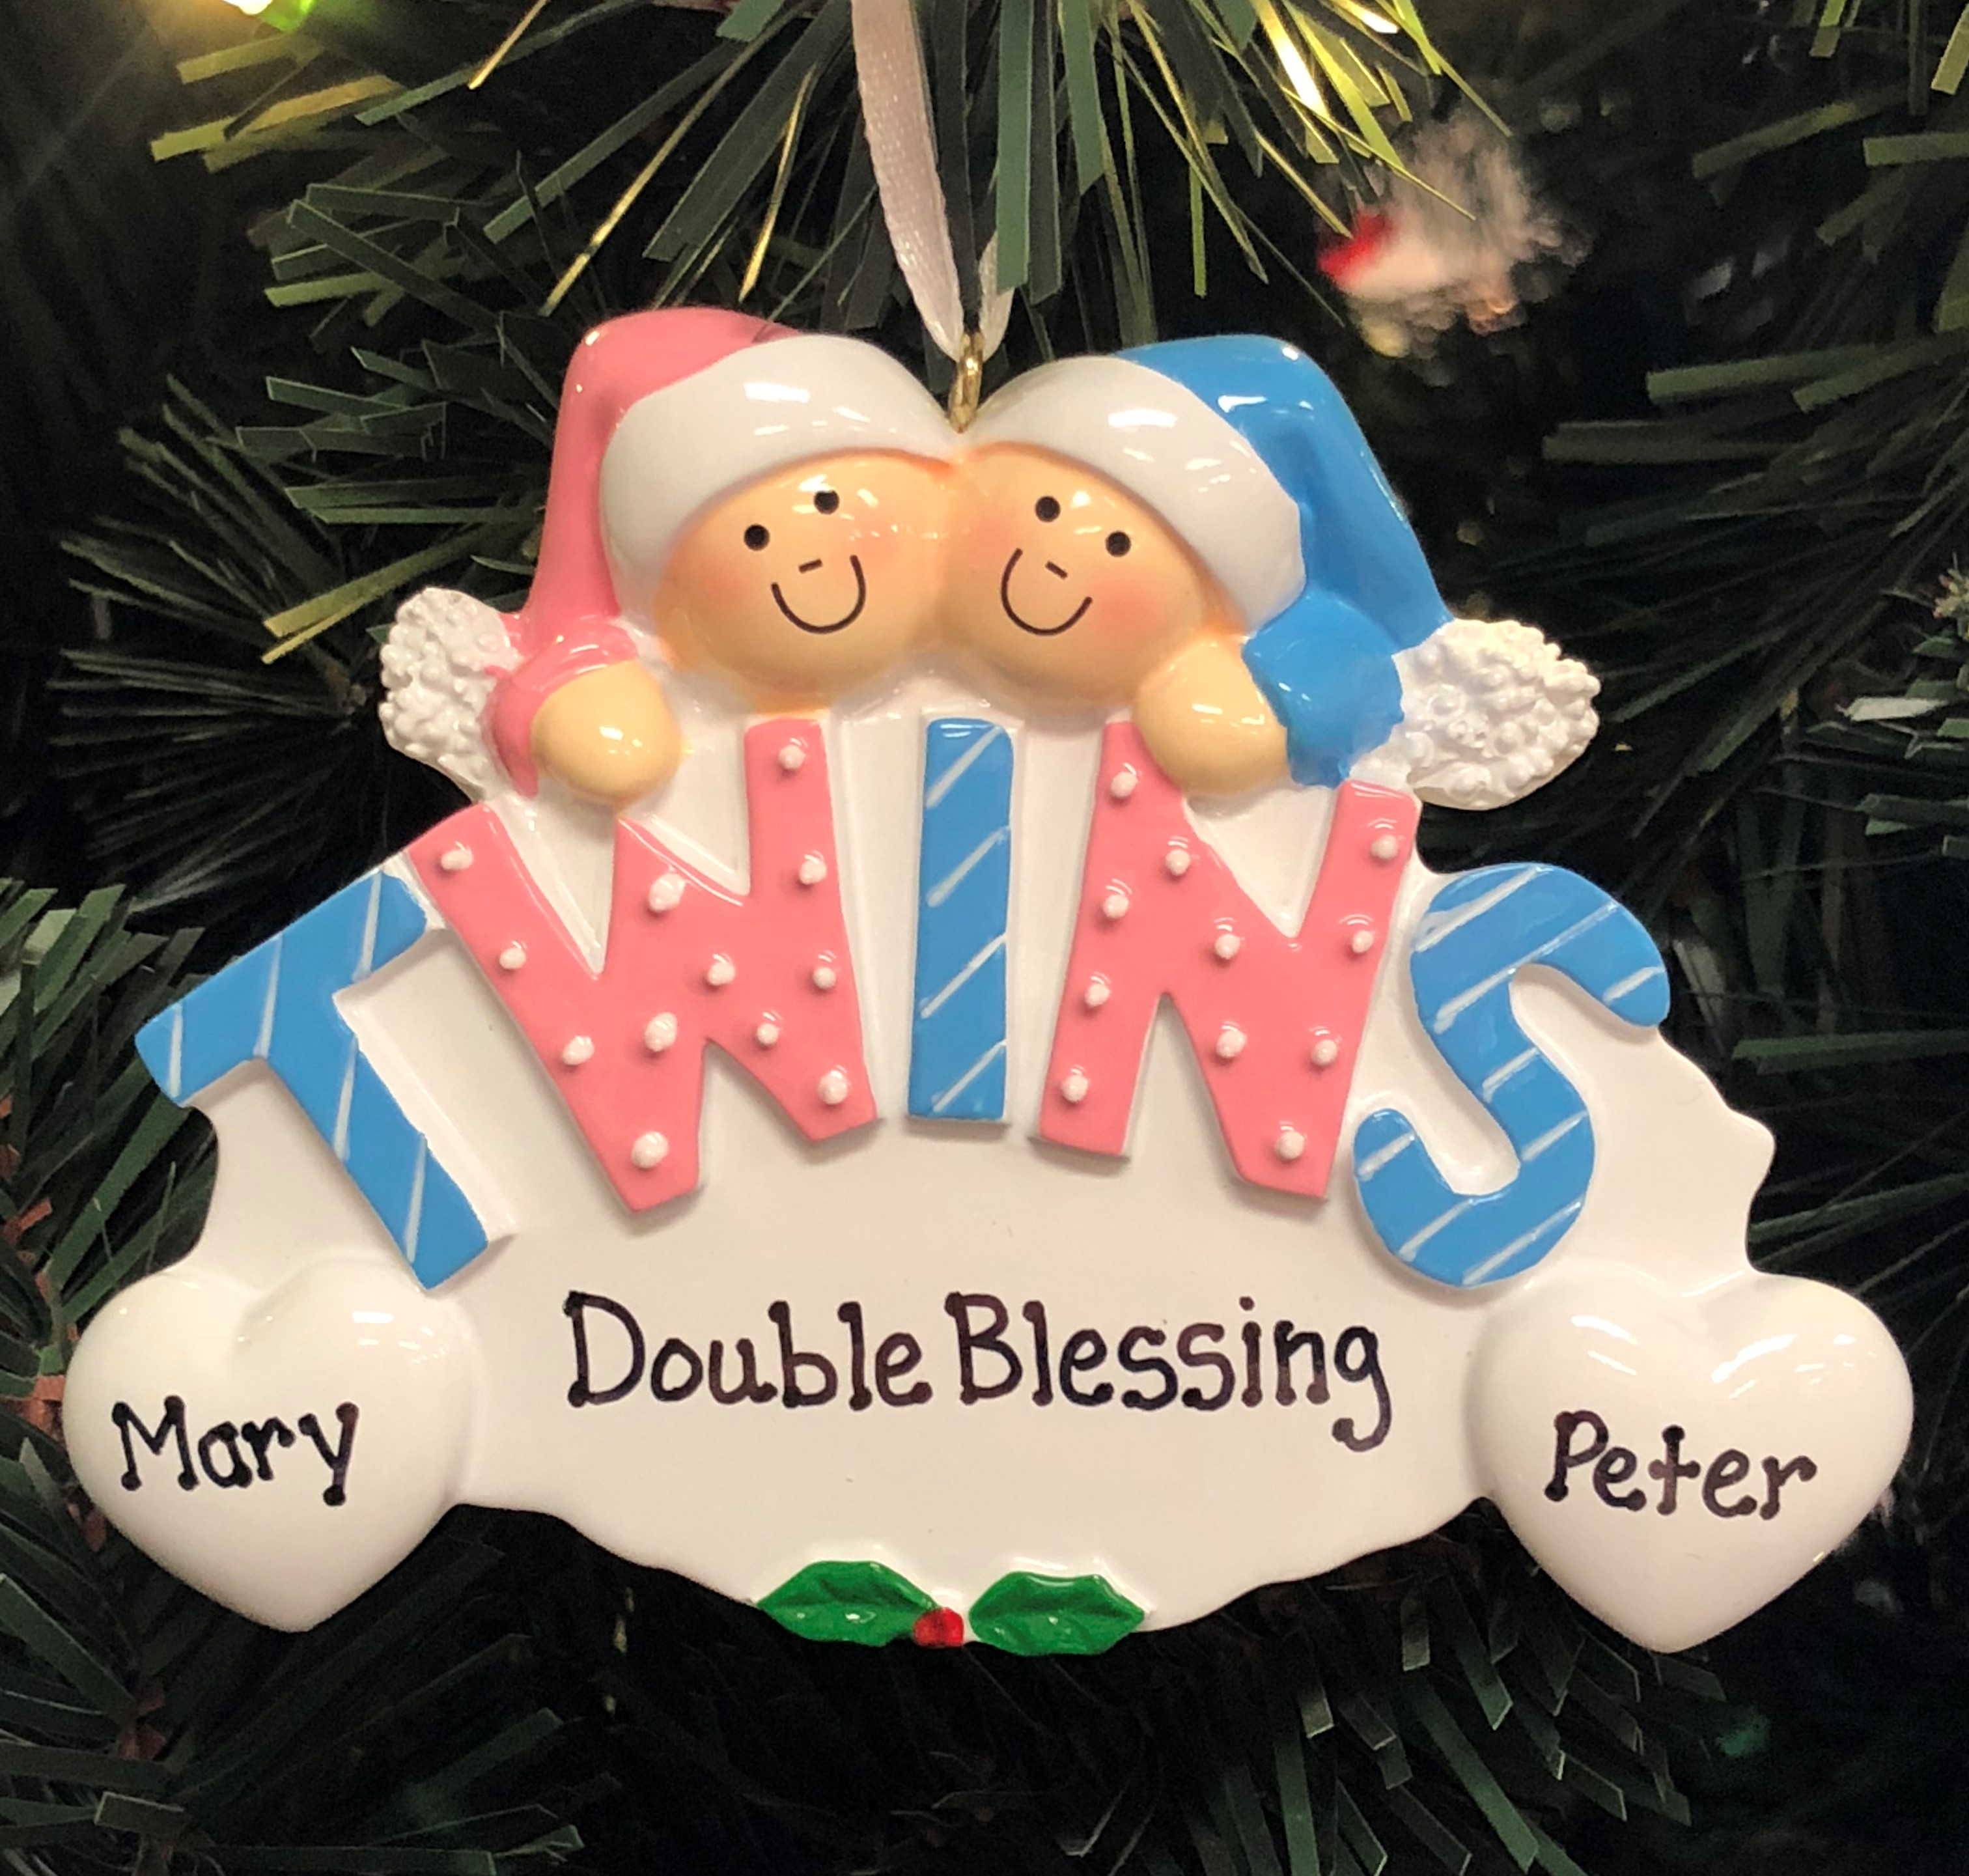 Twin Boy and Girl in Pink and Blue Christmas Ornament | OrnamentShop.com